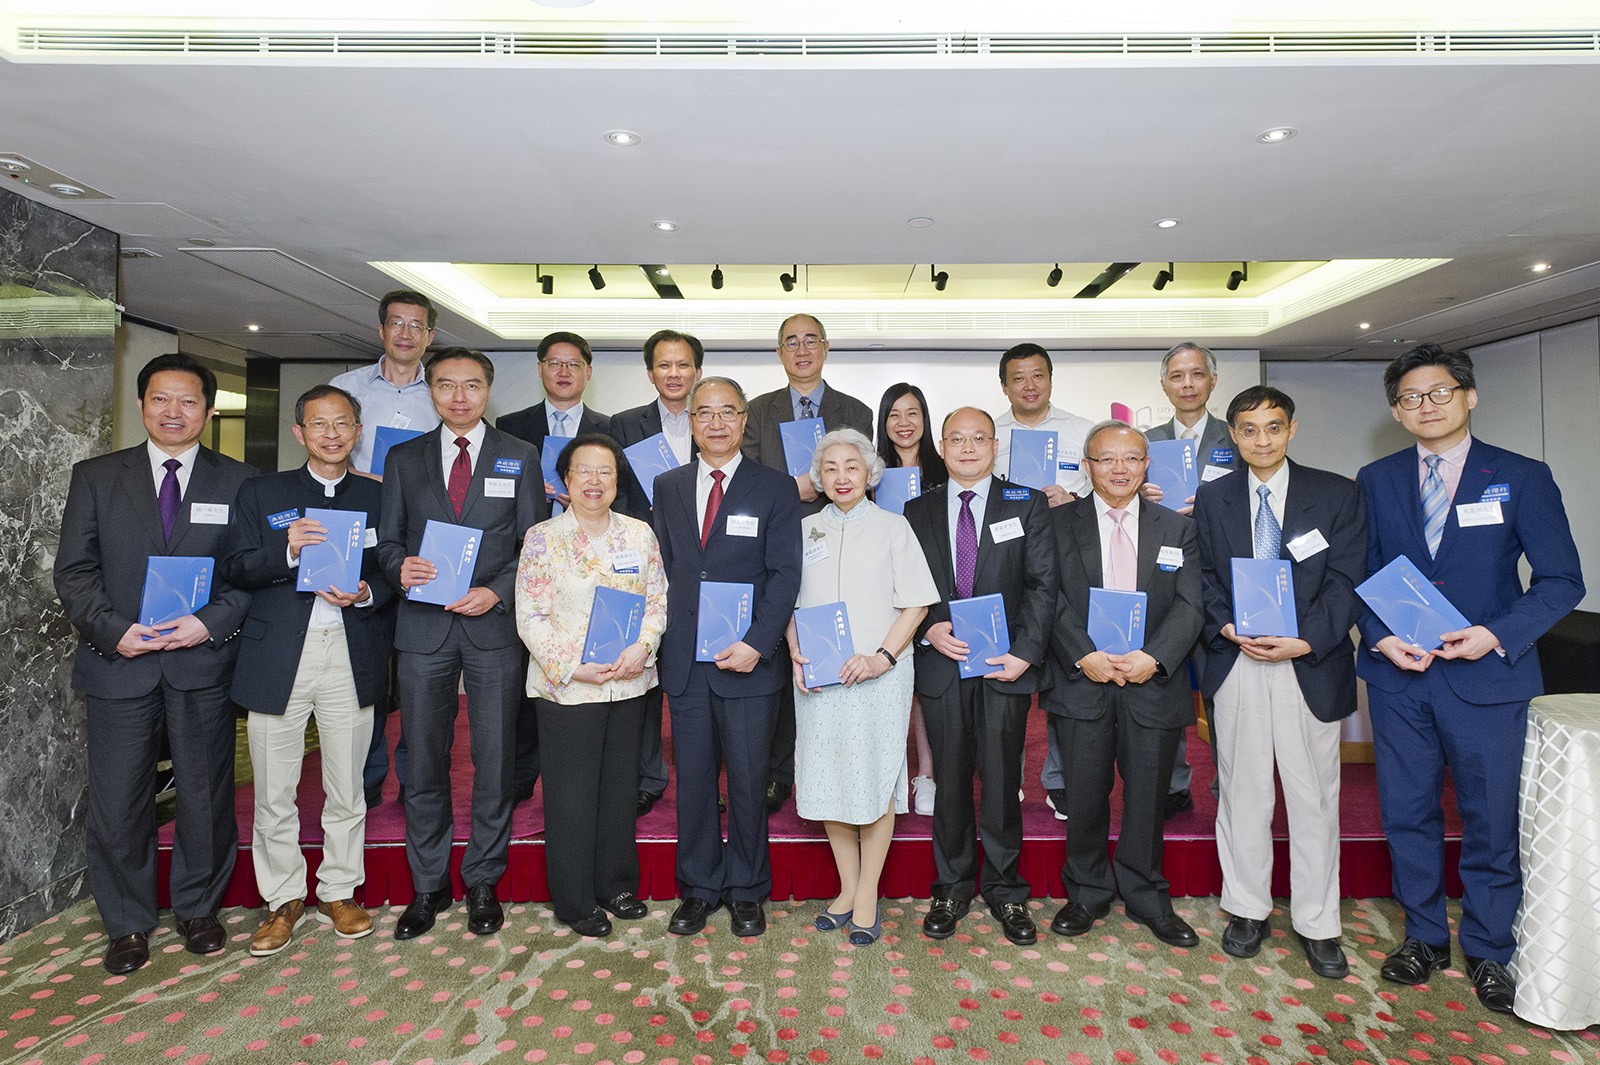 A launching ceremony for Advancing with the Times: Implementation of the One Country, Two Systems Policy and Basic Law in Hong Kong 